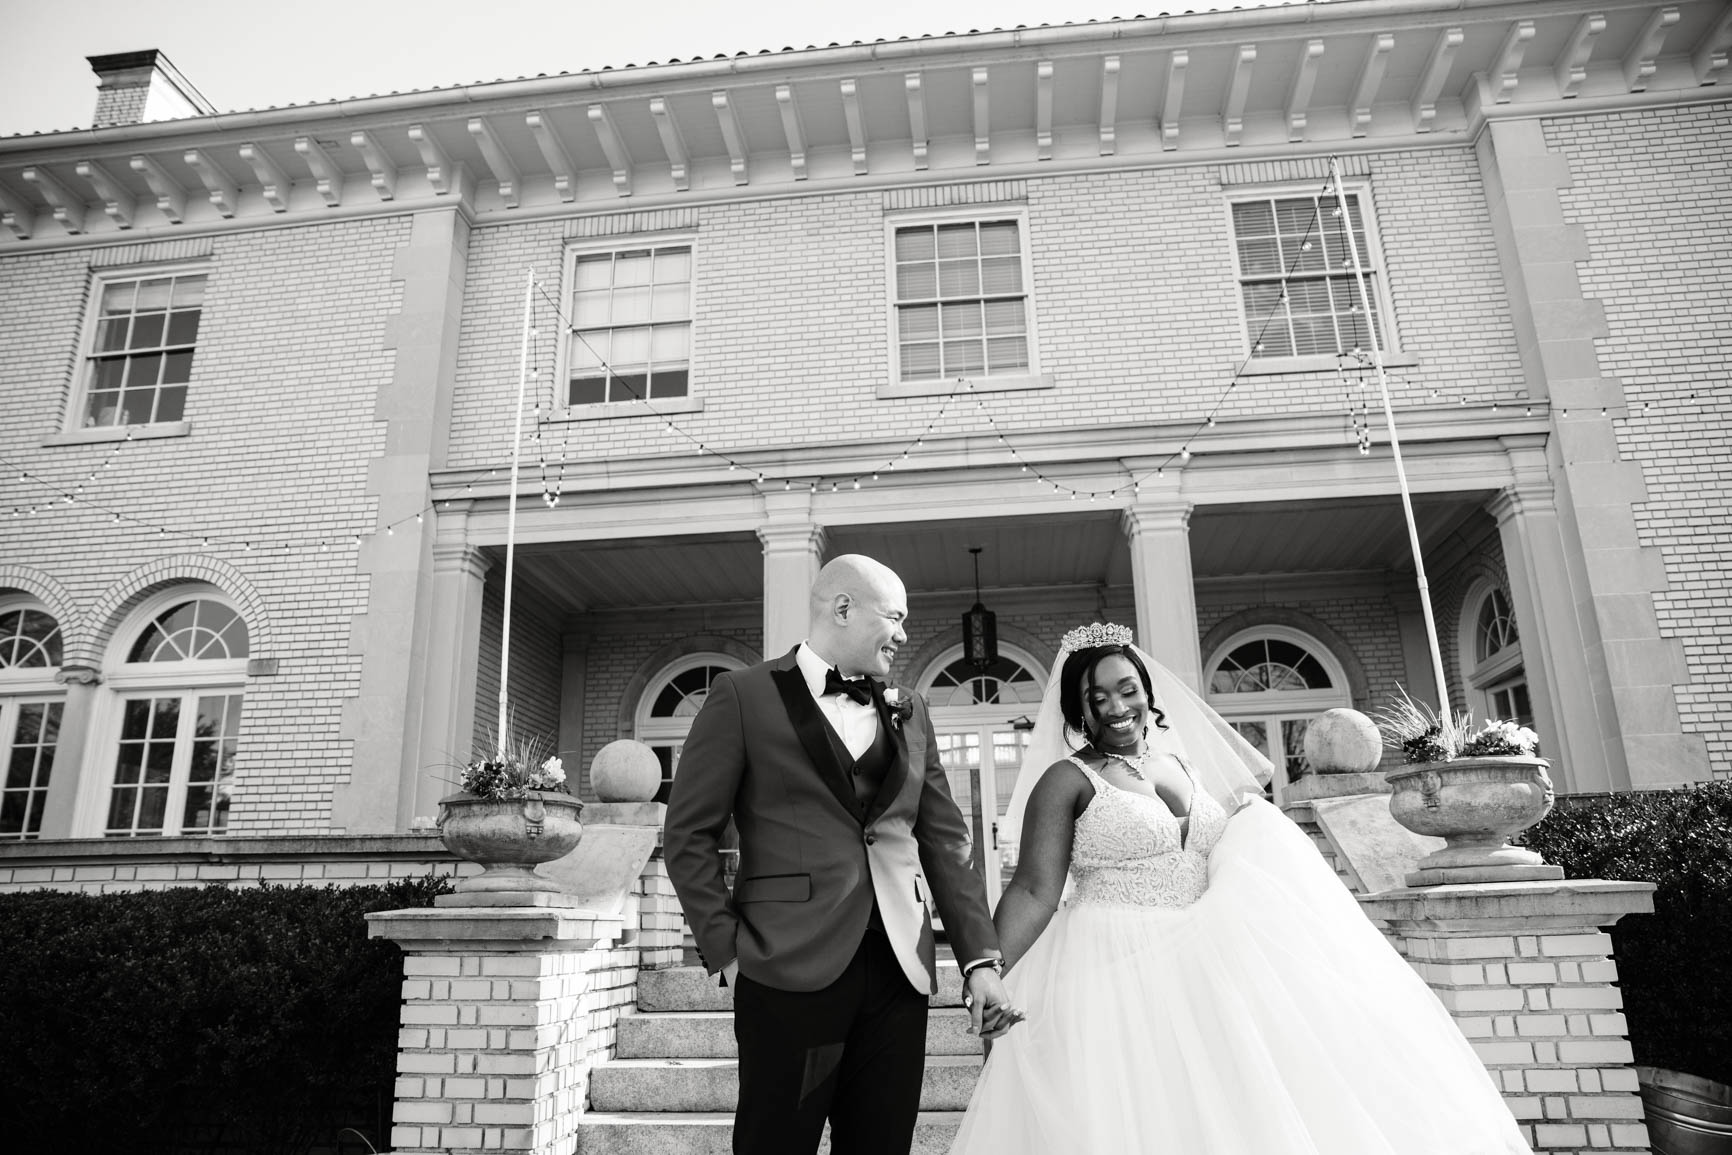 couple portraits at Separk Mansion in Gastonia NC shot by Nhieu Tang Photography | nhieutang.com